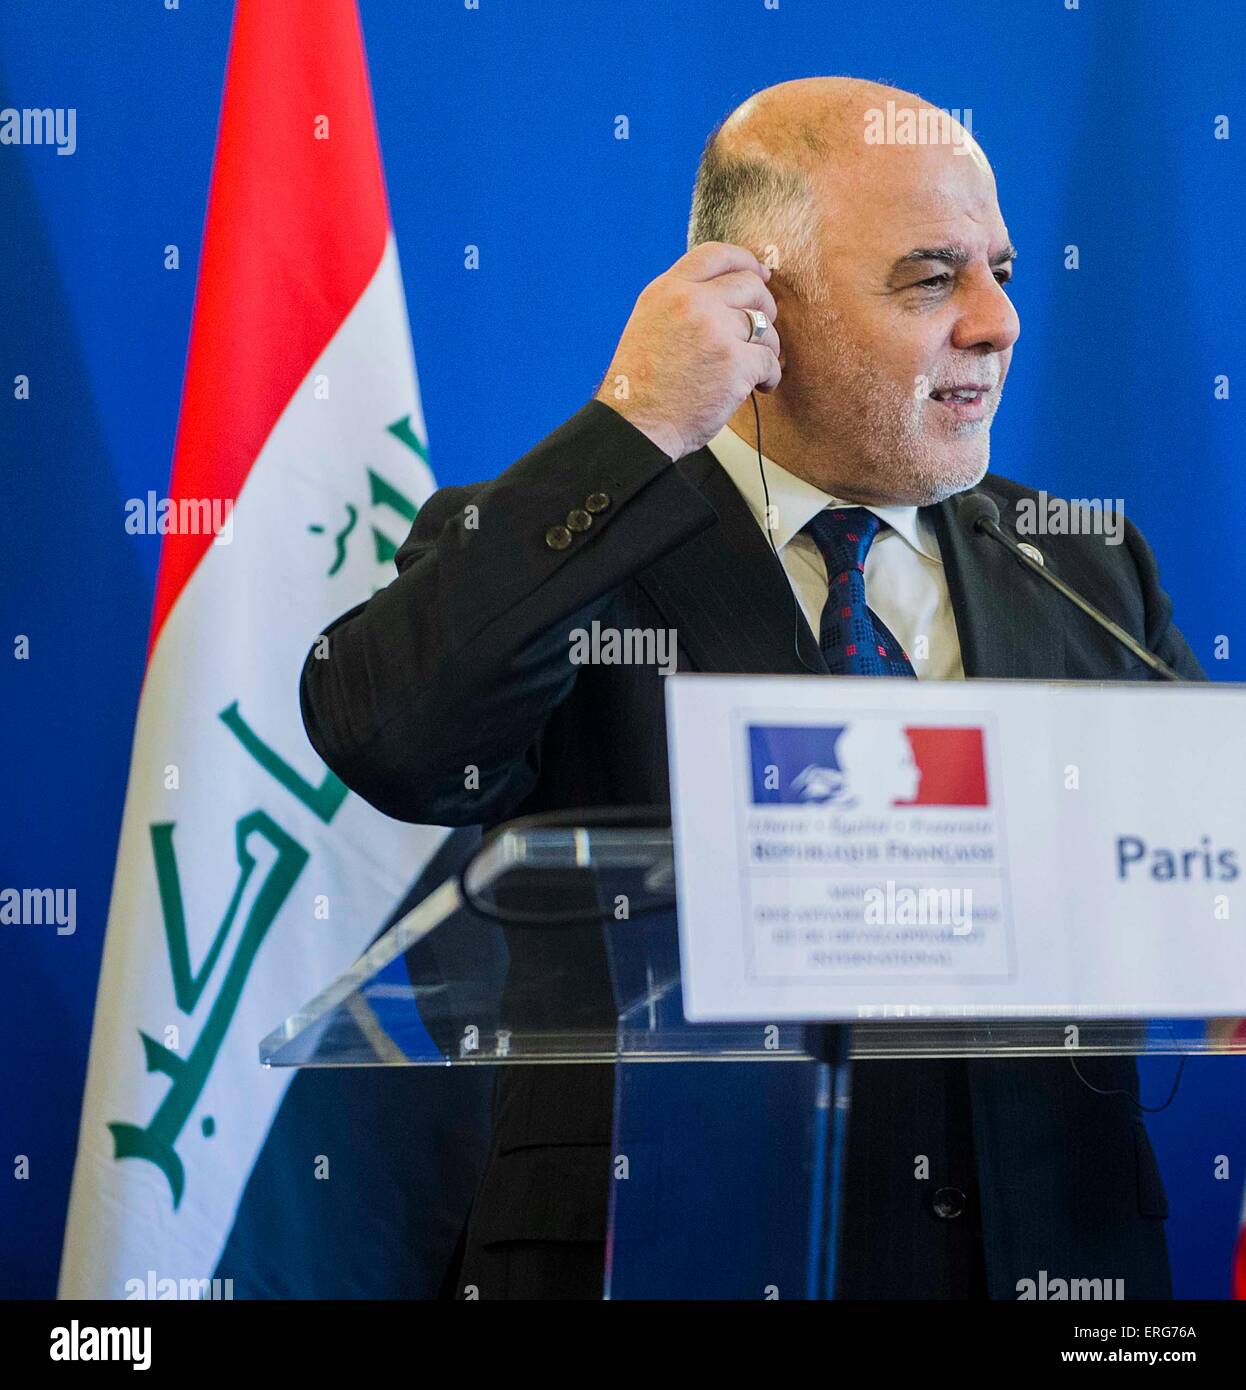 Paris, France. 2nd June, 2015. Iraqi Prime Minister Haider al-Abadi attends a joint press meeting with French Foreign Minister Laurent Fabius and U.S. Deputy Secretary of State Antony Blinken (not seen in picture) in Paris, France, June 2, 2015. French Foreign Minister Laurent Fabius said on Tuesday the fight against Islamic State (IS) militants in Iraq would be longer than anticipated, reiterating the coalition countries' determination to eradicate the Islamist threat in the region. © Chen Xiaowei/Xinhua/Alamy Live News Stock Photo